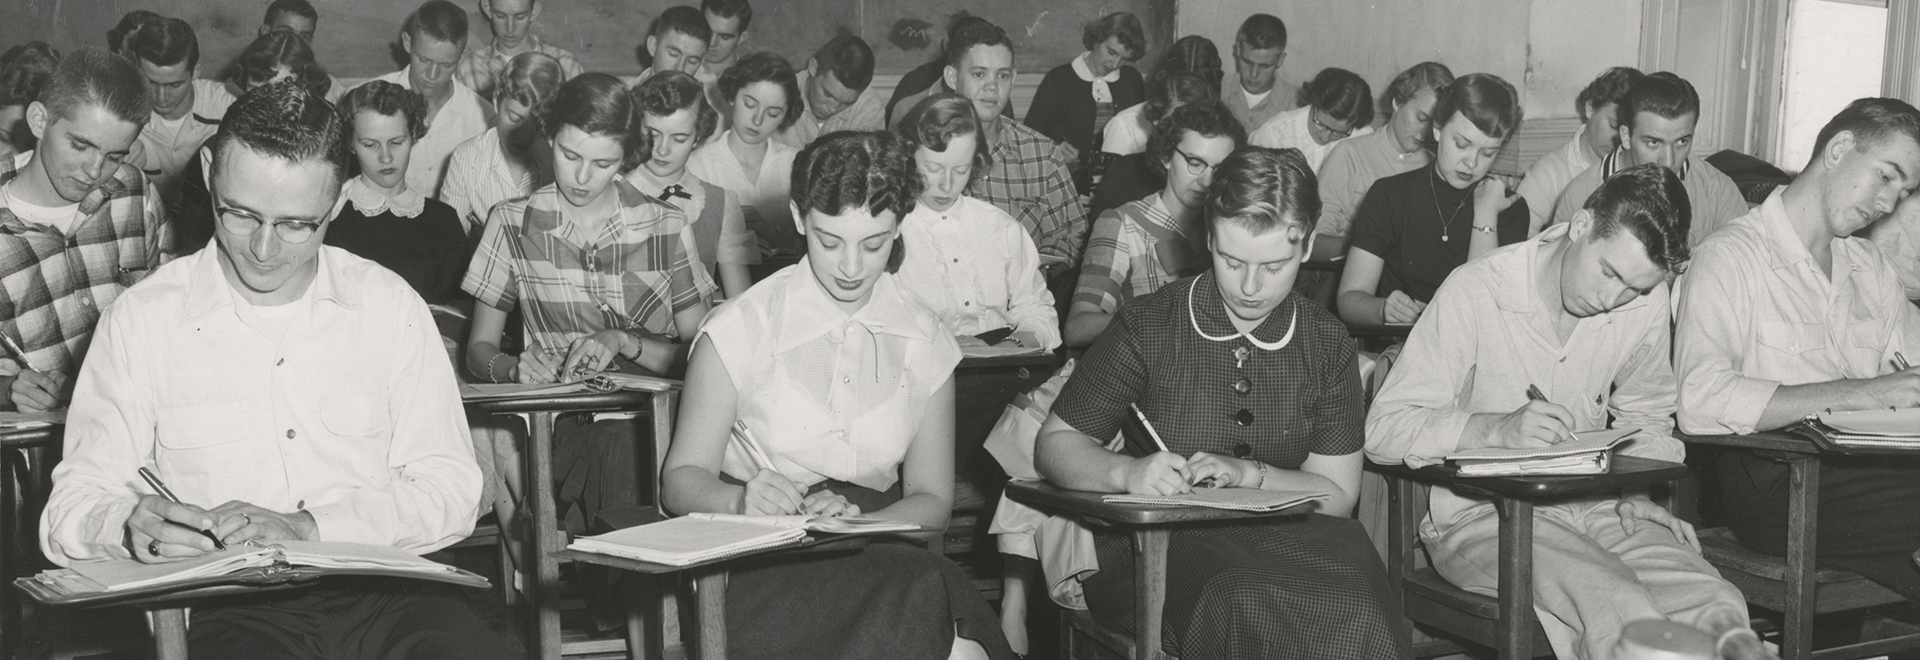 view of Students Writing in Class